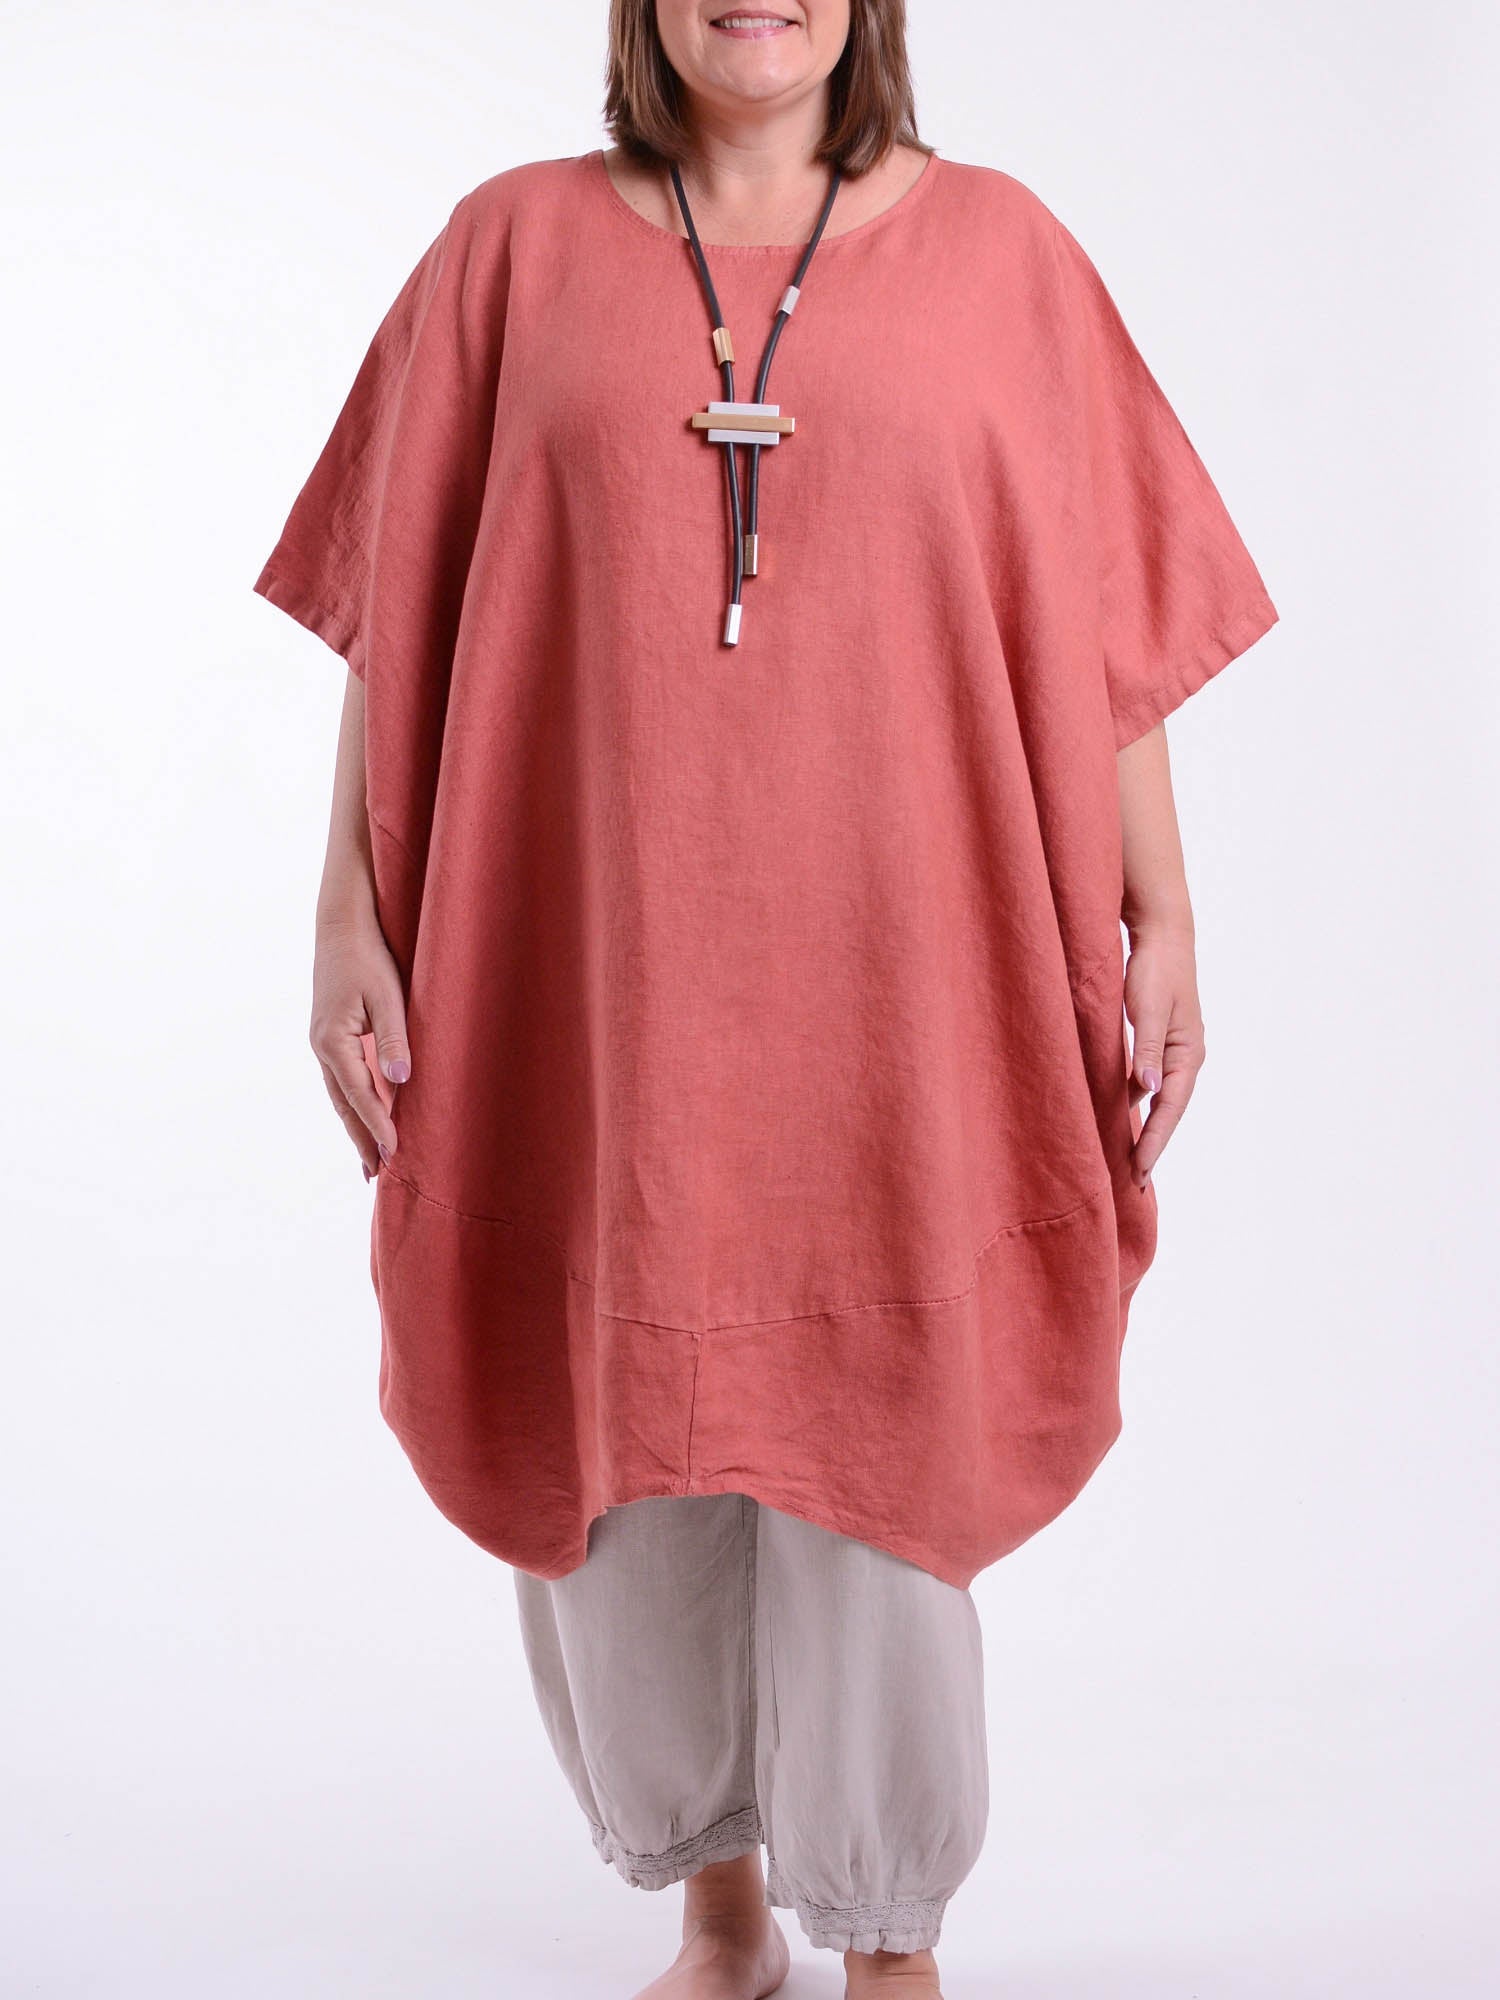 Lagenlook Linen Cocoon Dress - 9811, Dresses, Pure Plus Clothing, Lagenlook Clothing, Plus Size Fashion, Over 50 Fashion